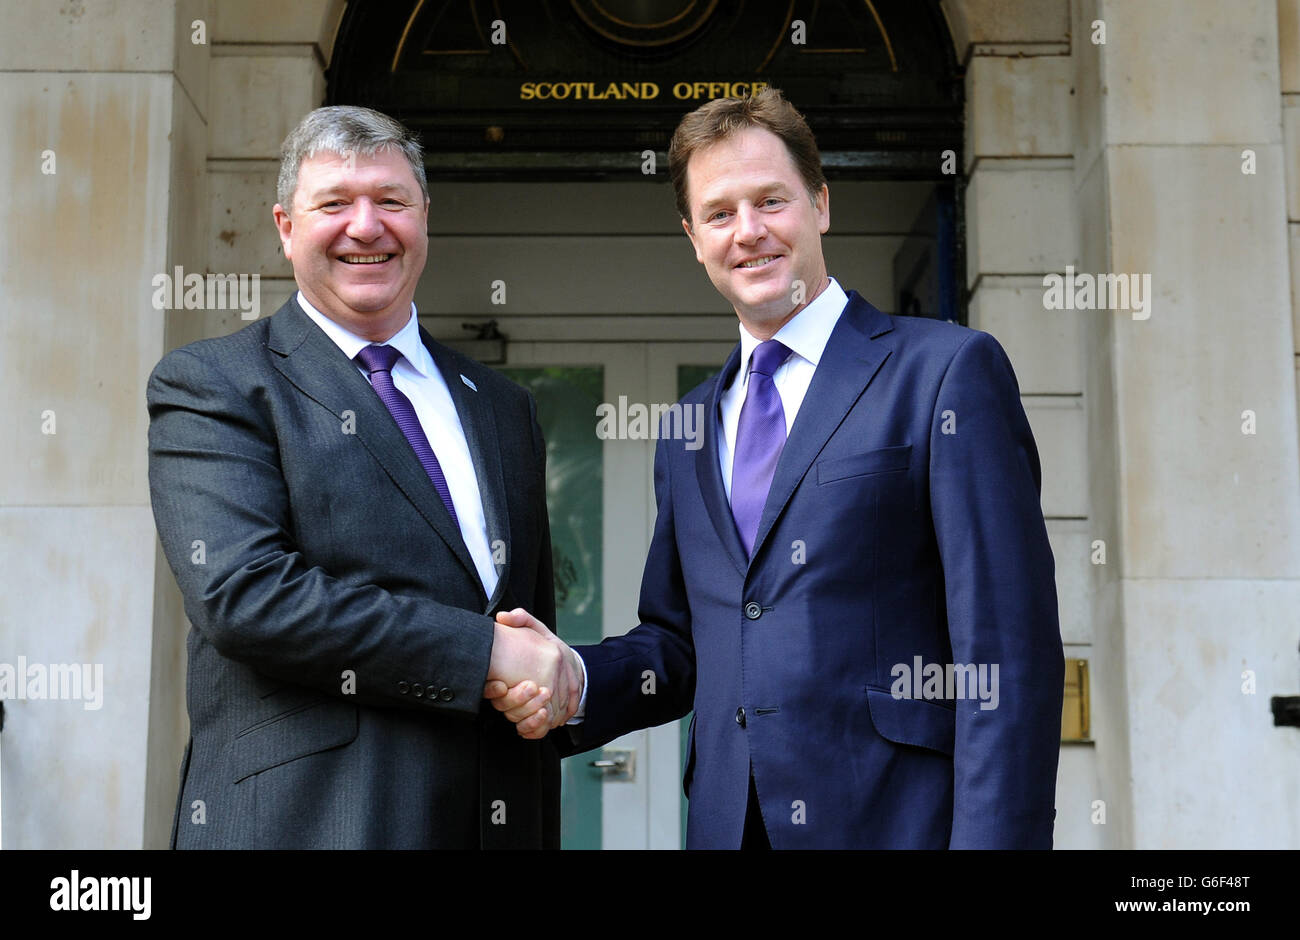 Orkney and Shetland MP Alistair Carmichael,(left) who has replaced Michael Moore as the Scottish Secretary, is greeted by Deputy Prime Minister and Liberal Democrat leader Nick Clegg, as he arrives at the Scotland Office, Whitehall, central London, after Prime Minister David Cameron, kicked off a coalition reshuffle, with Scottish Secretary Michael Moore among the casualties. Stock Photo